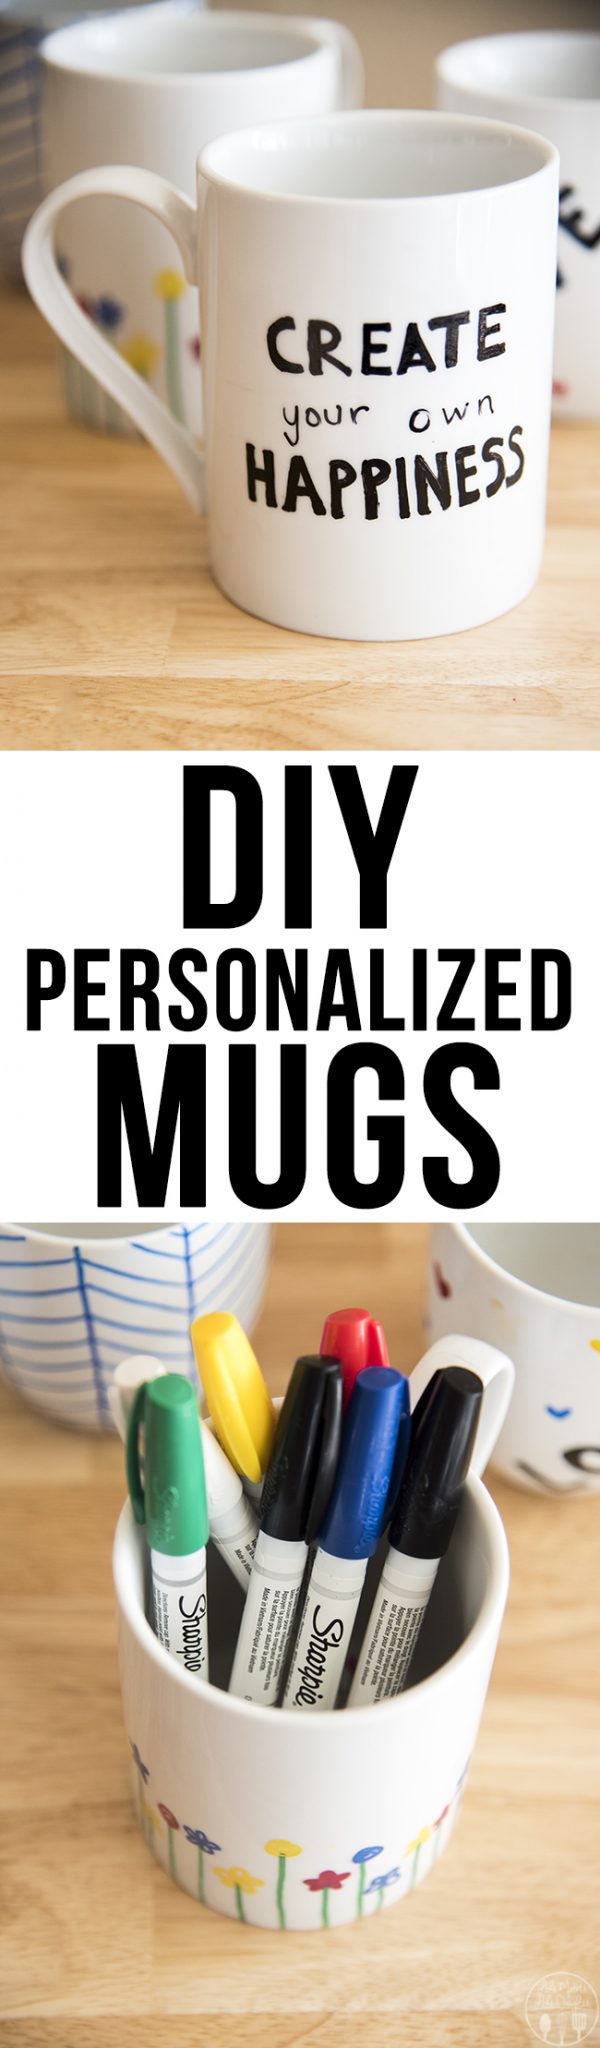 Title card for DIY personalized mugs.